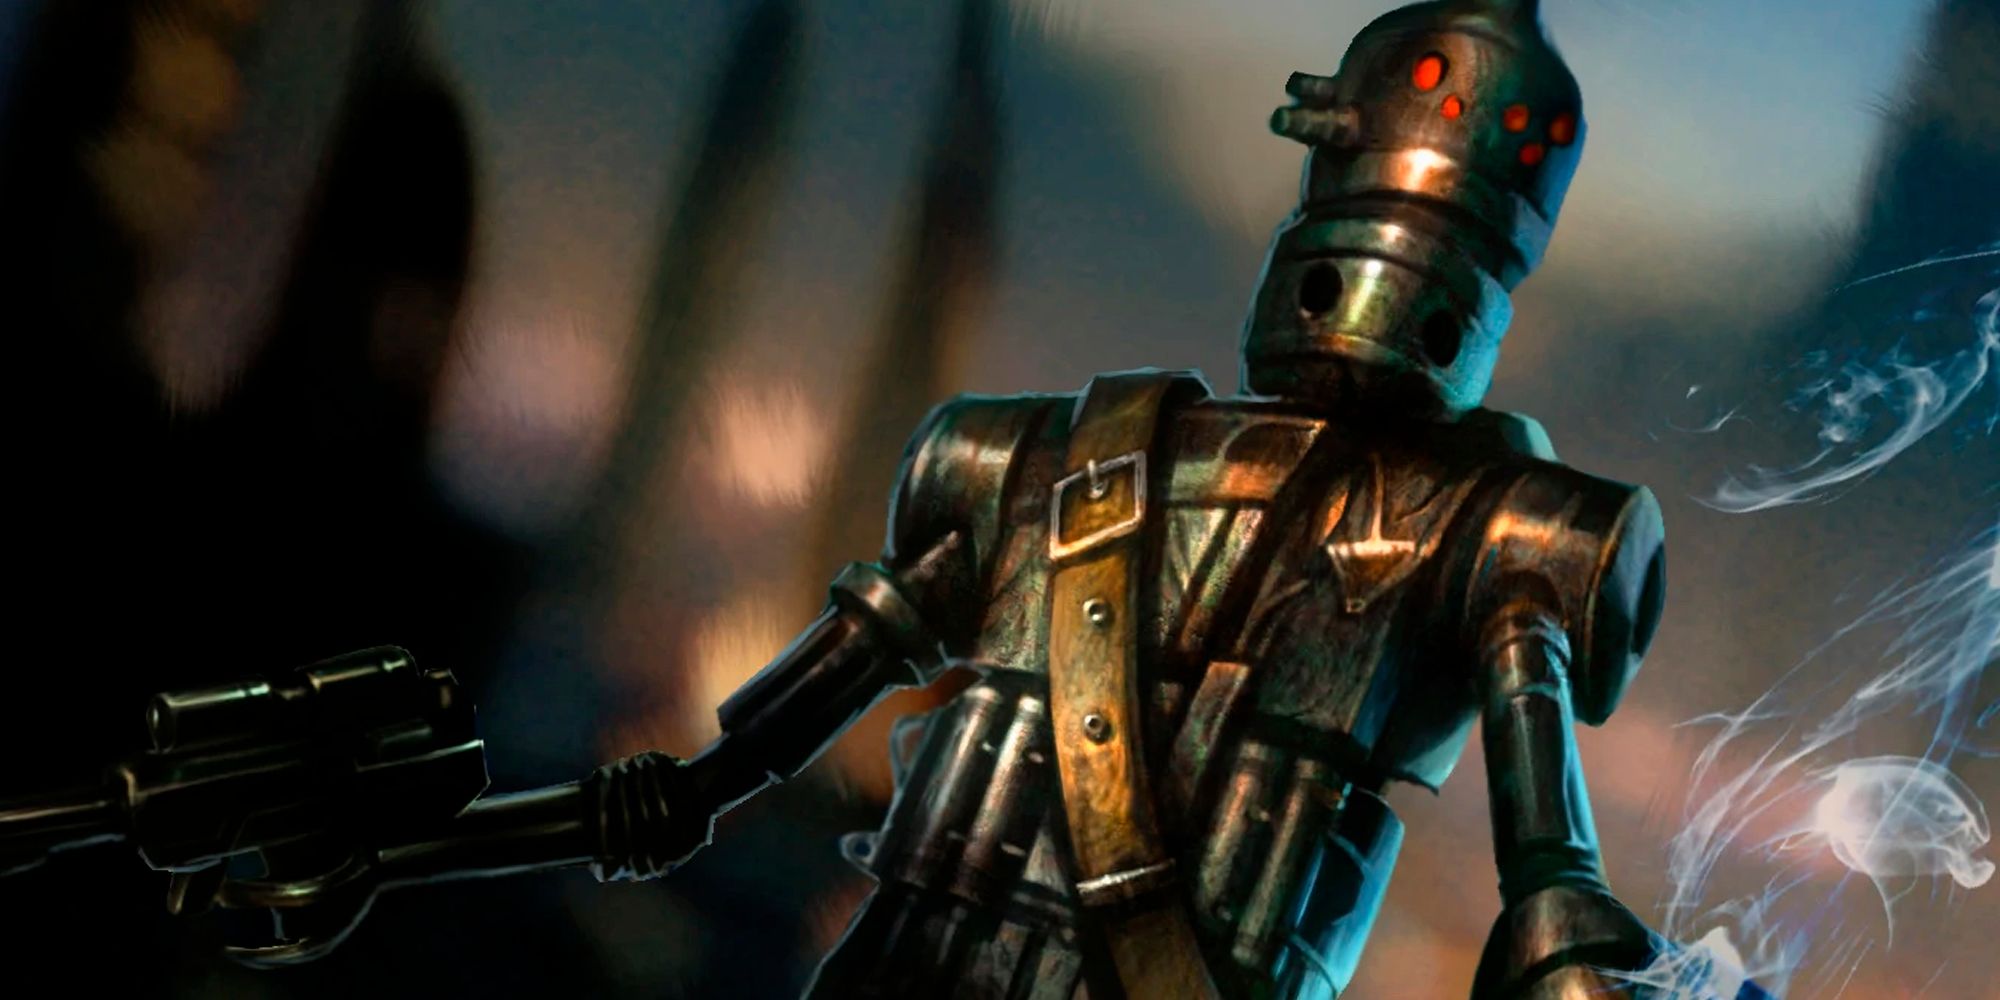 IG-88 wields his guns in The Empire Strikes Back.